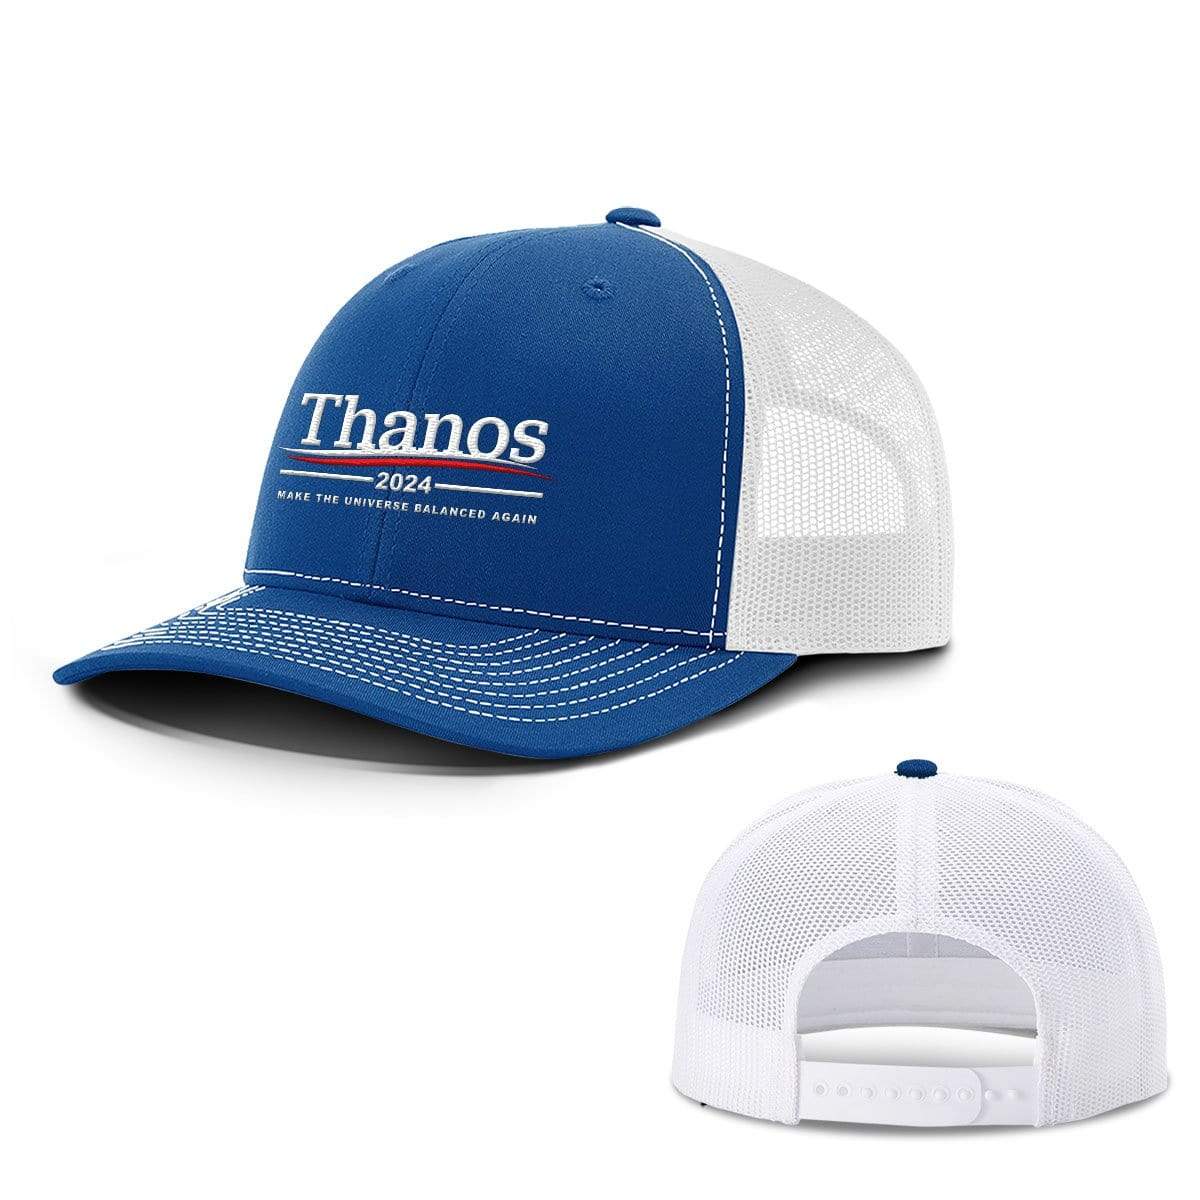 SunFrog-Busted Hats Thanos 2024 Hats